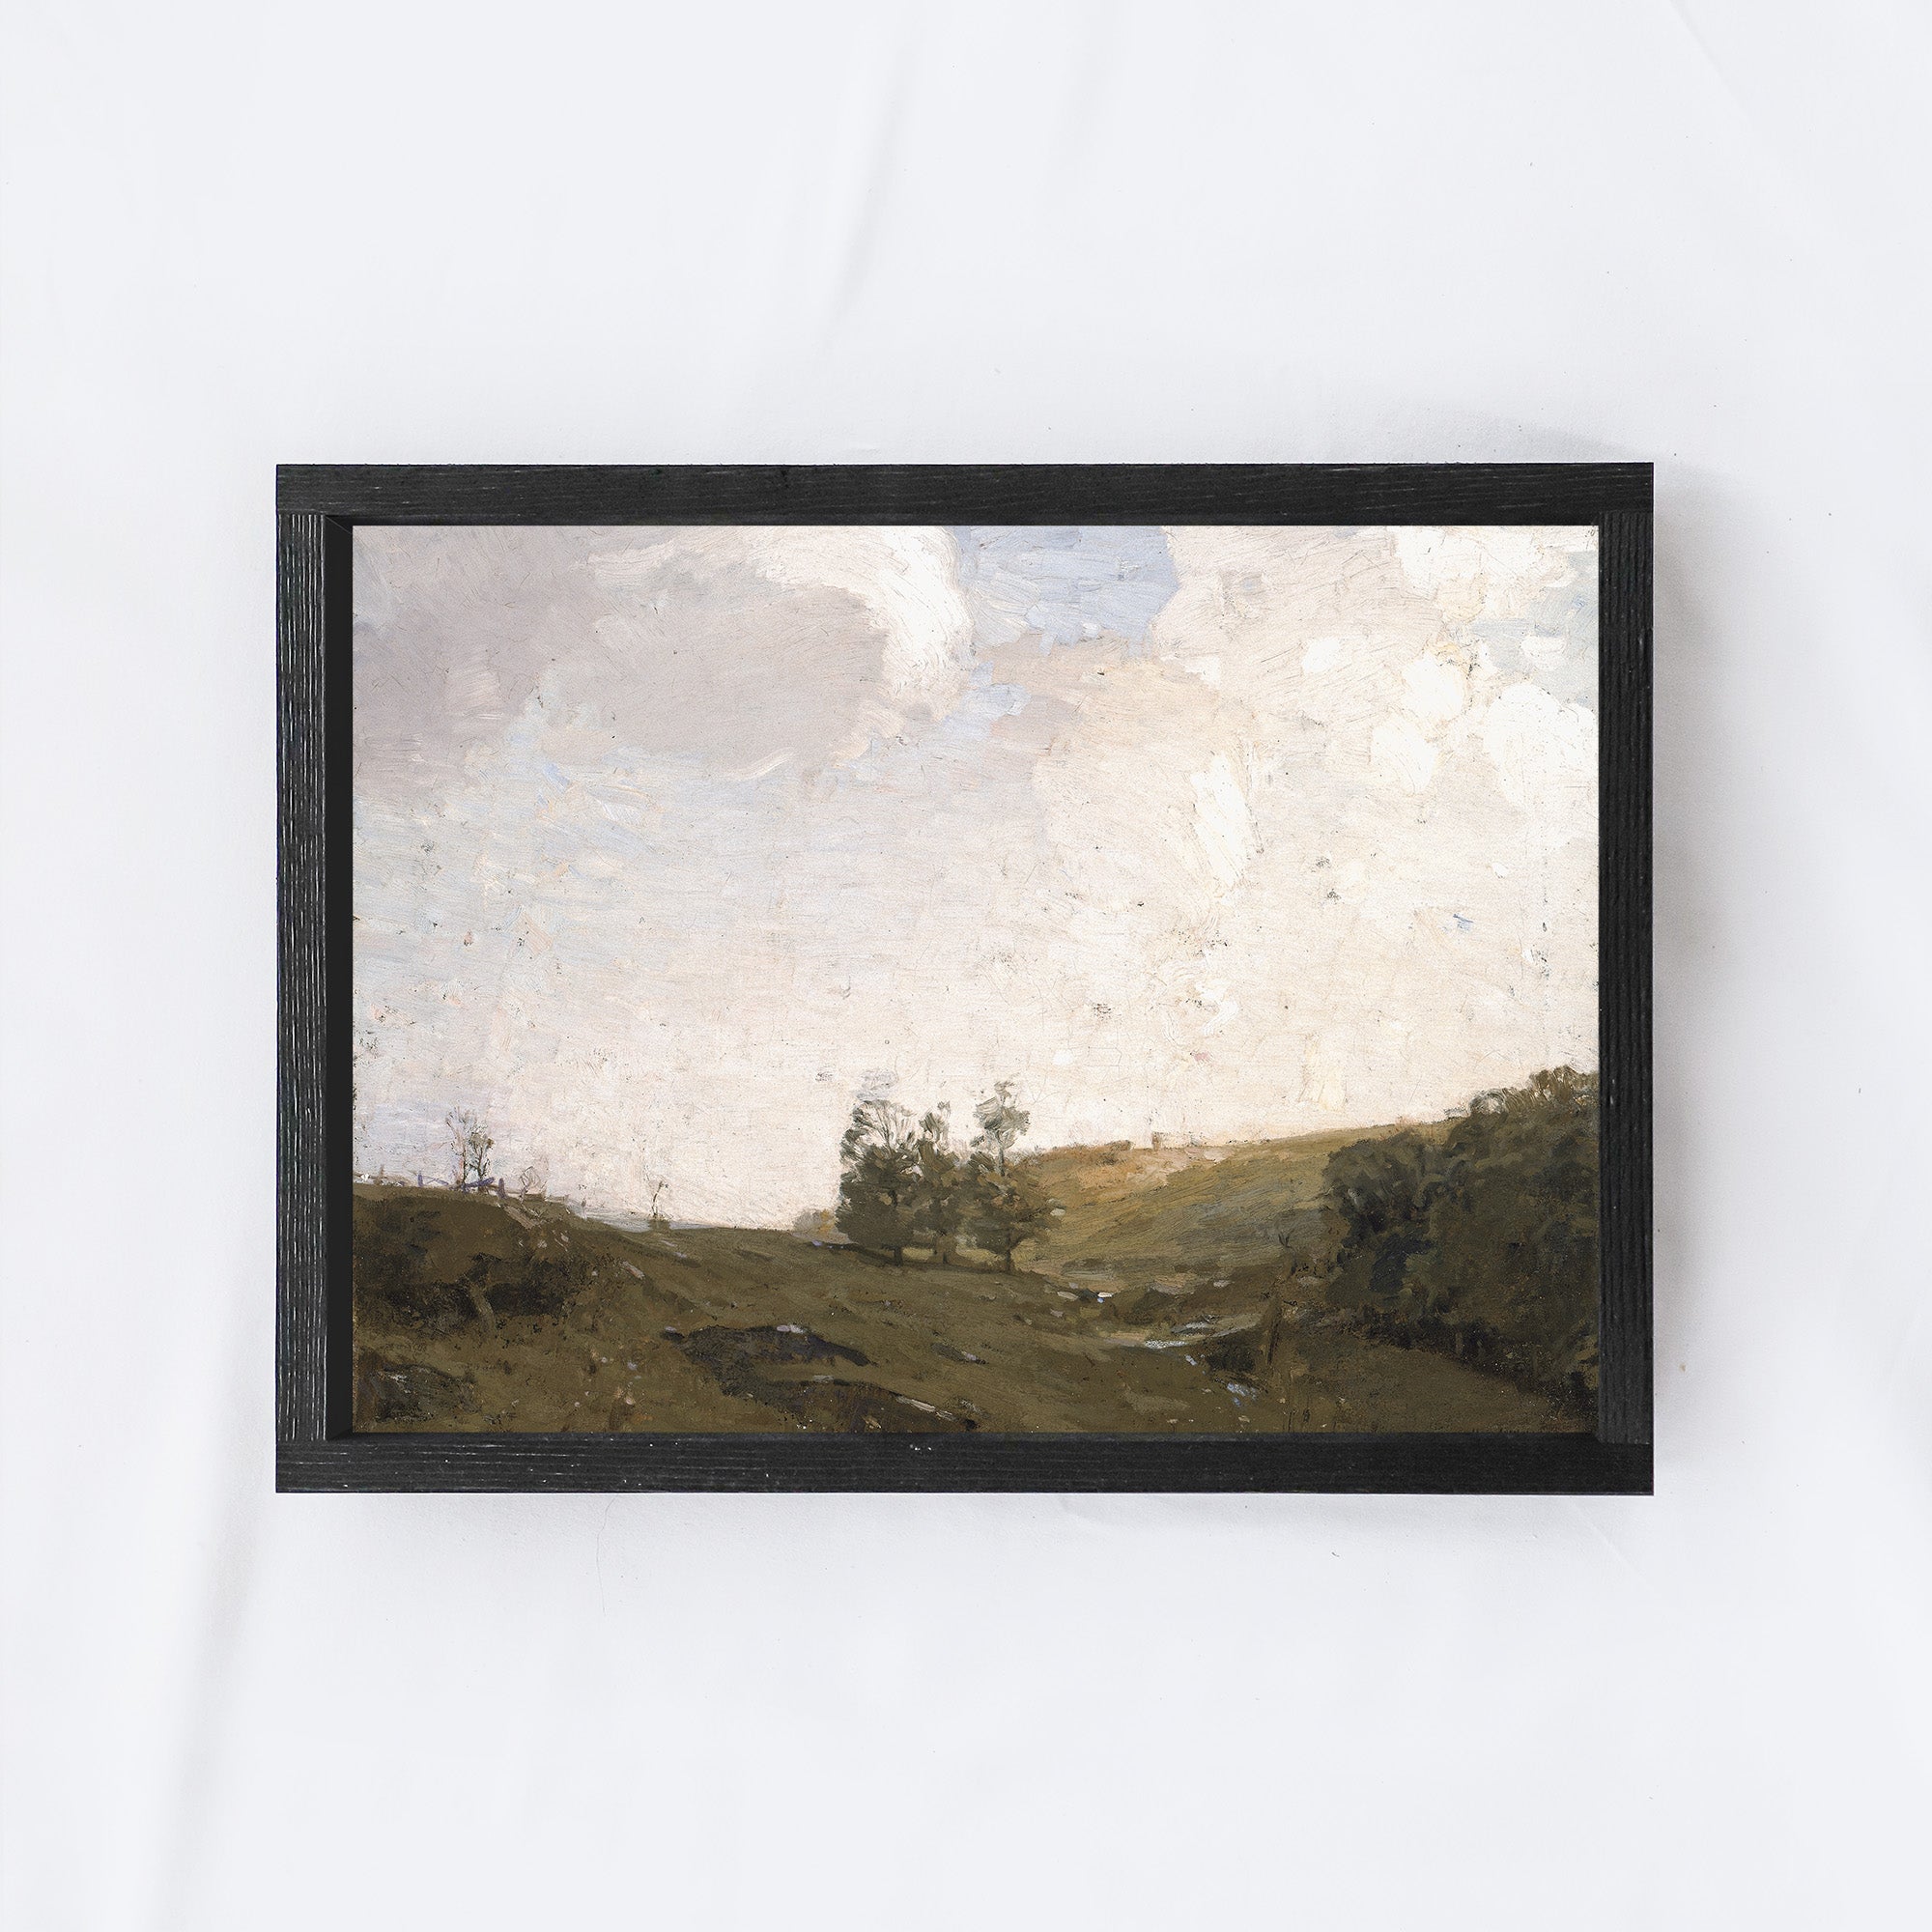 Hills And A Pasture Landscape Painting A67